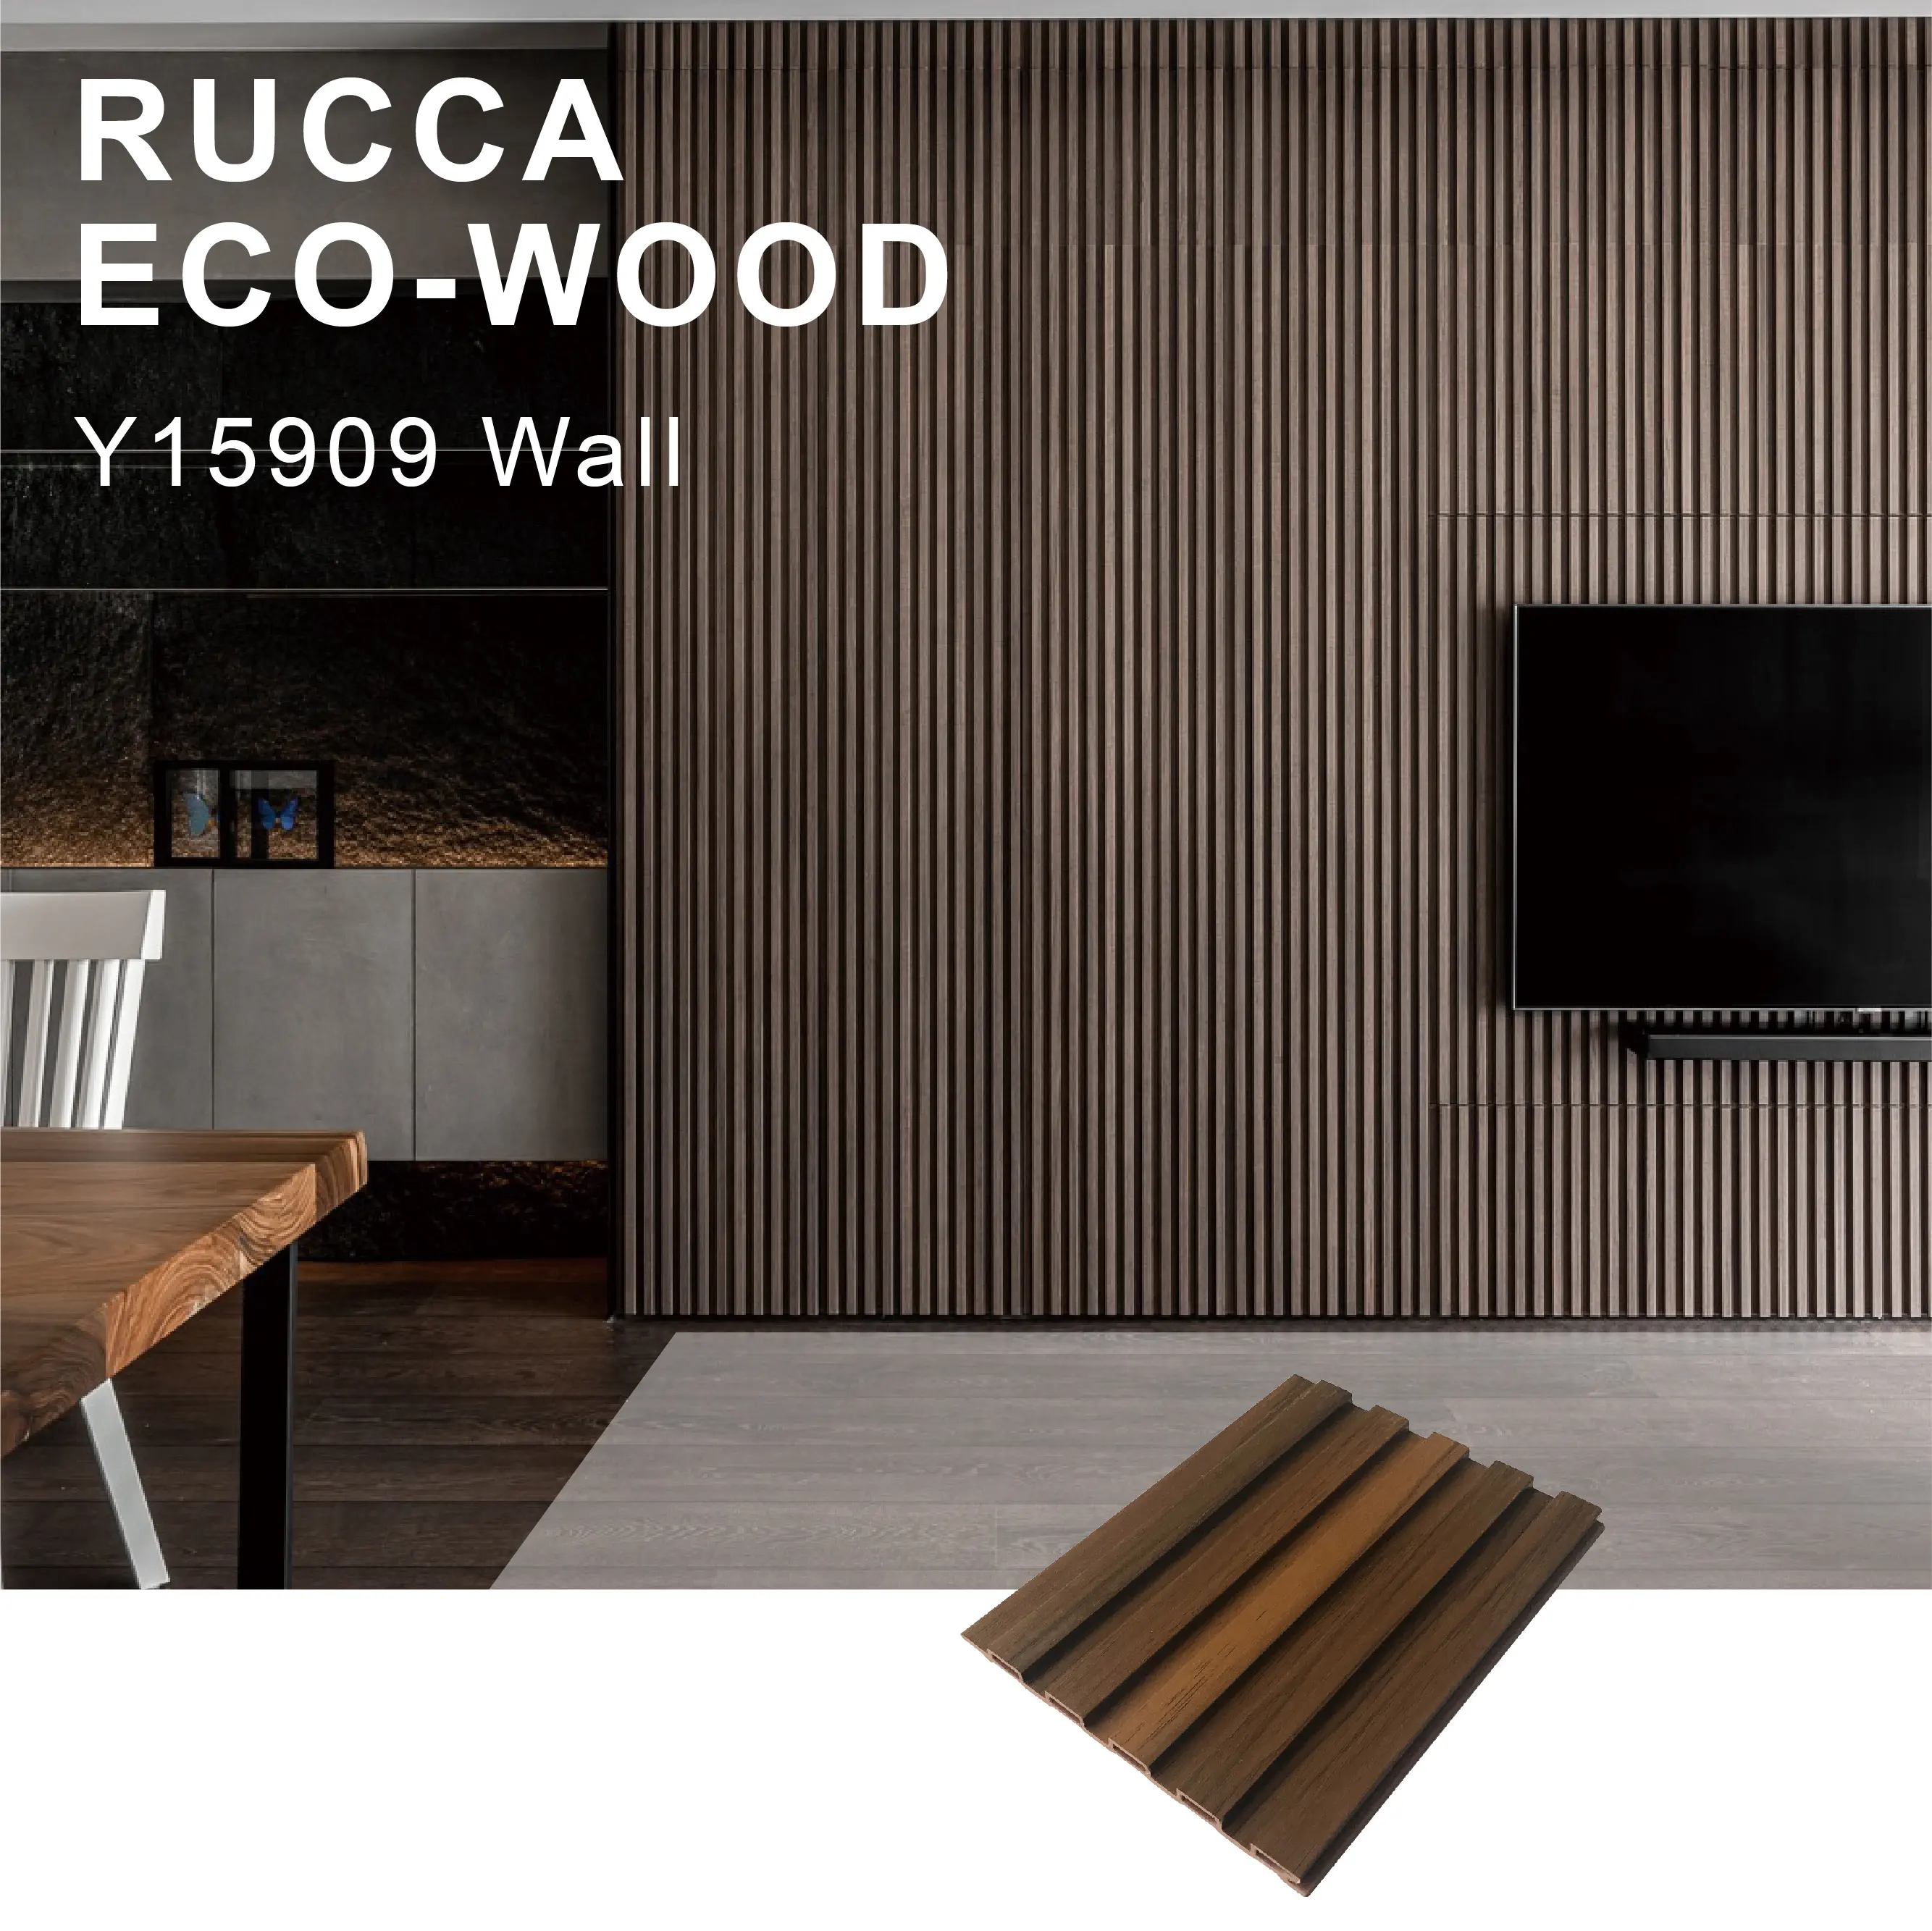 Rucca WPC/PVC Wood Plastic Composite Laminate 159*09mm Wall Panels for Indoor Interior Decoration Facade